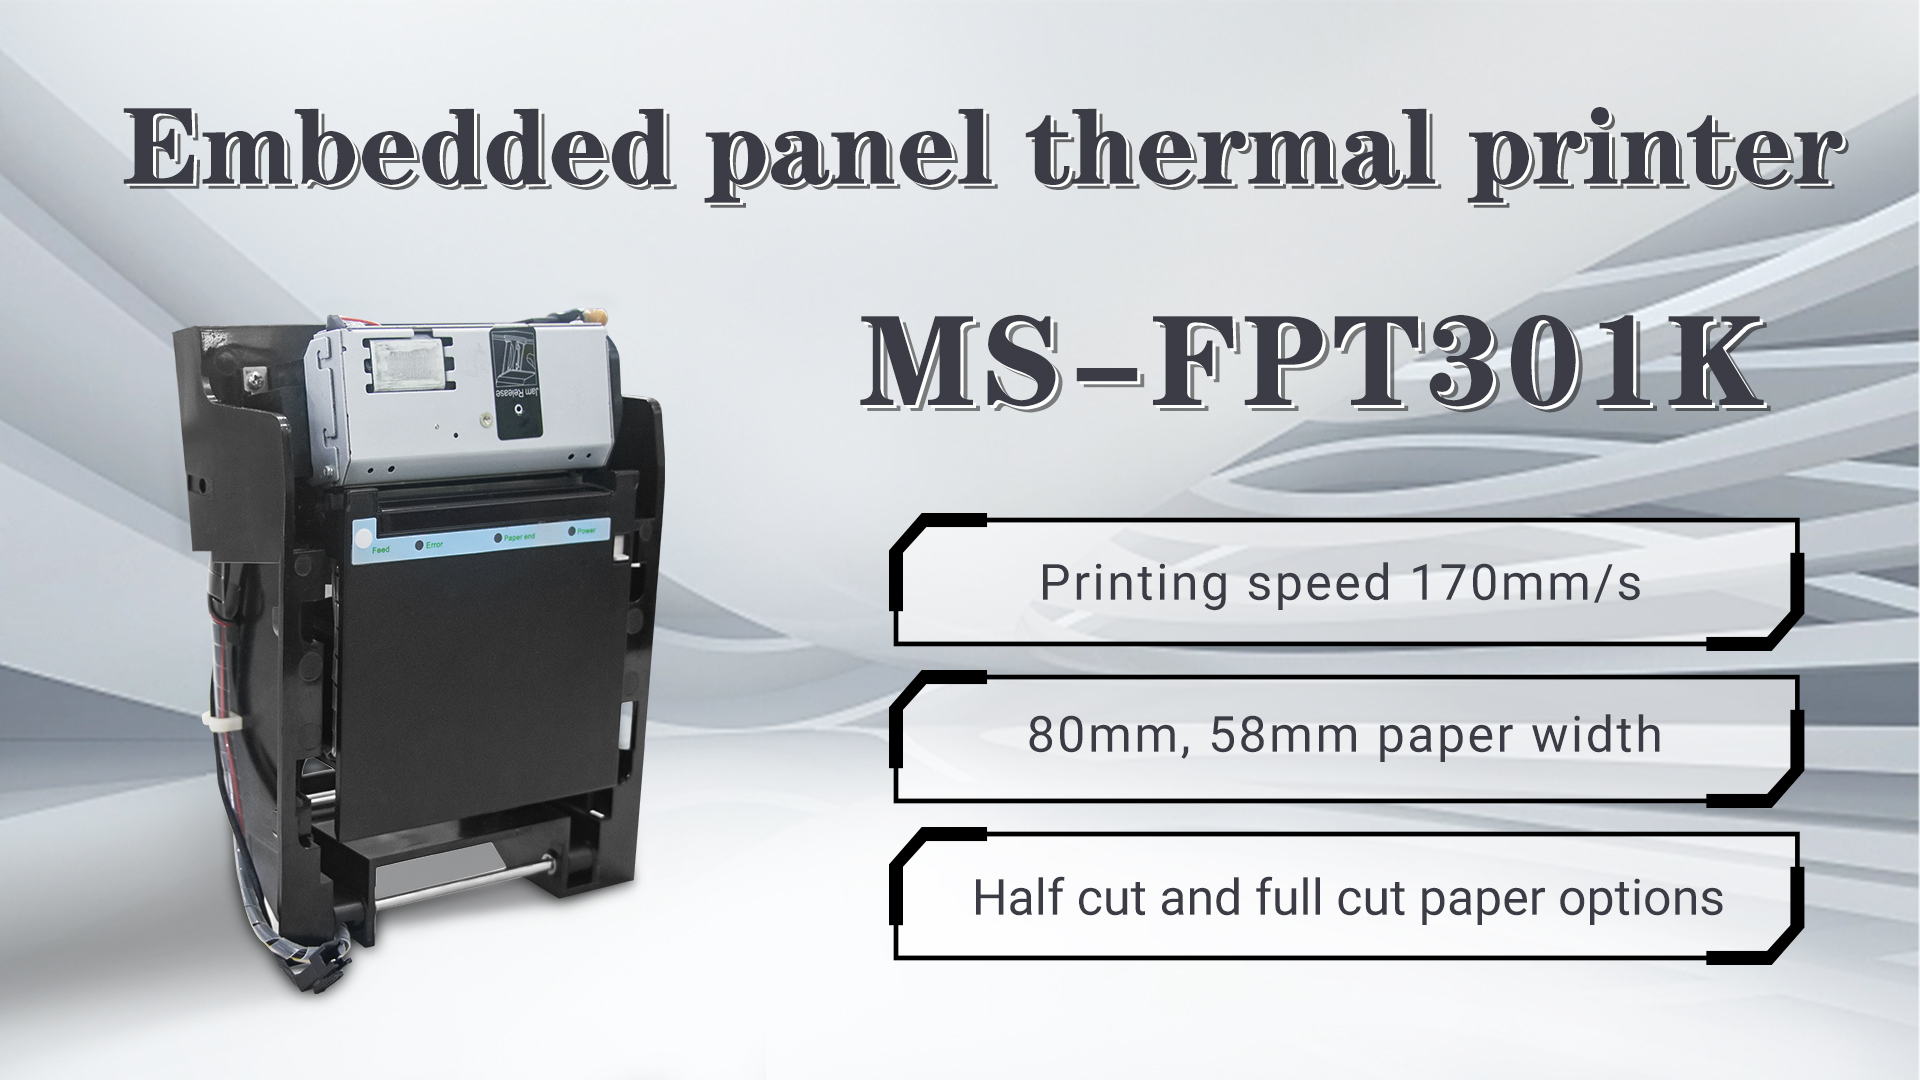 MASUNG  printer MS-FPT301K provides solutions for theater movie ticket printing